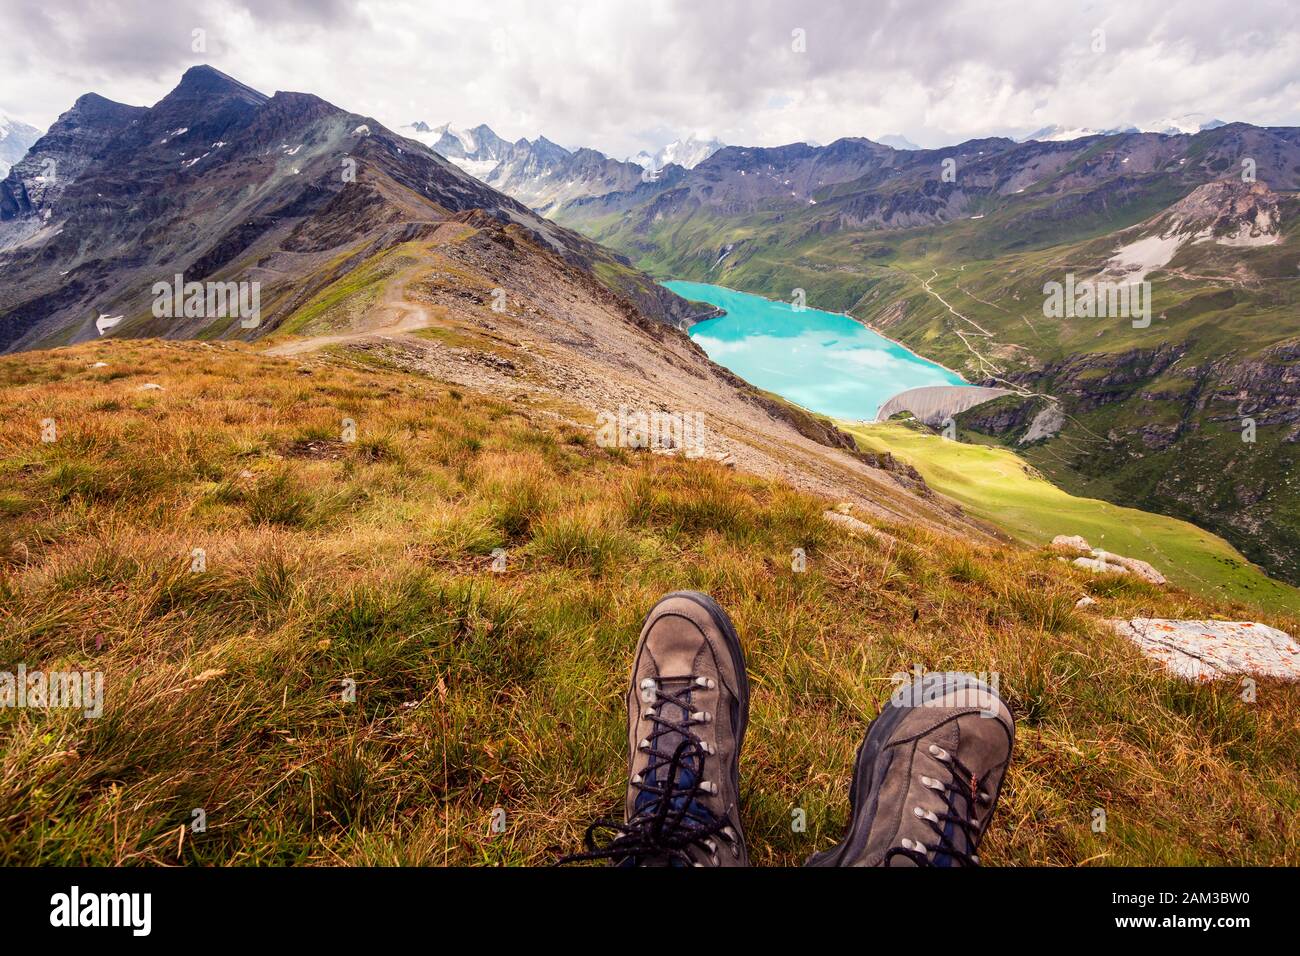 Enjoy breathtaking view from the top of a mountain on a mountain lake. First person perspective of hiking shoes. Corne de Sorebois, Grimentz, Valais, Stock Photo